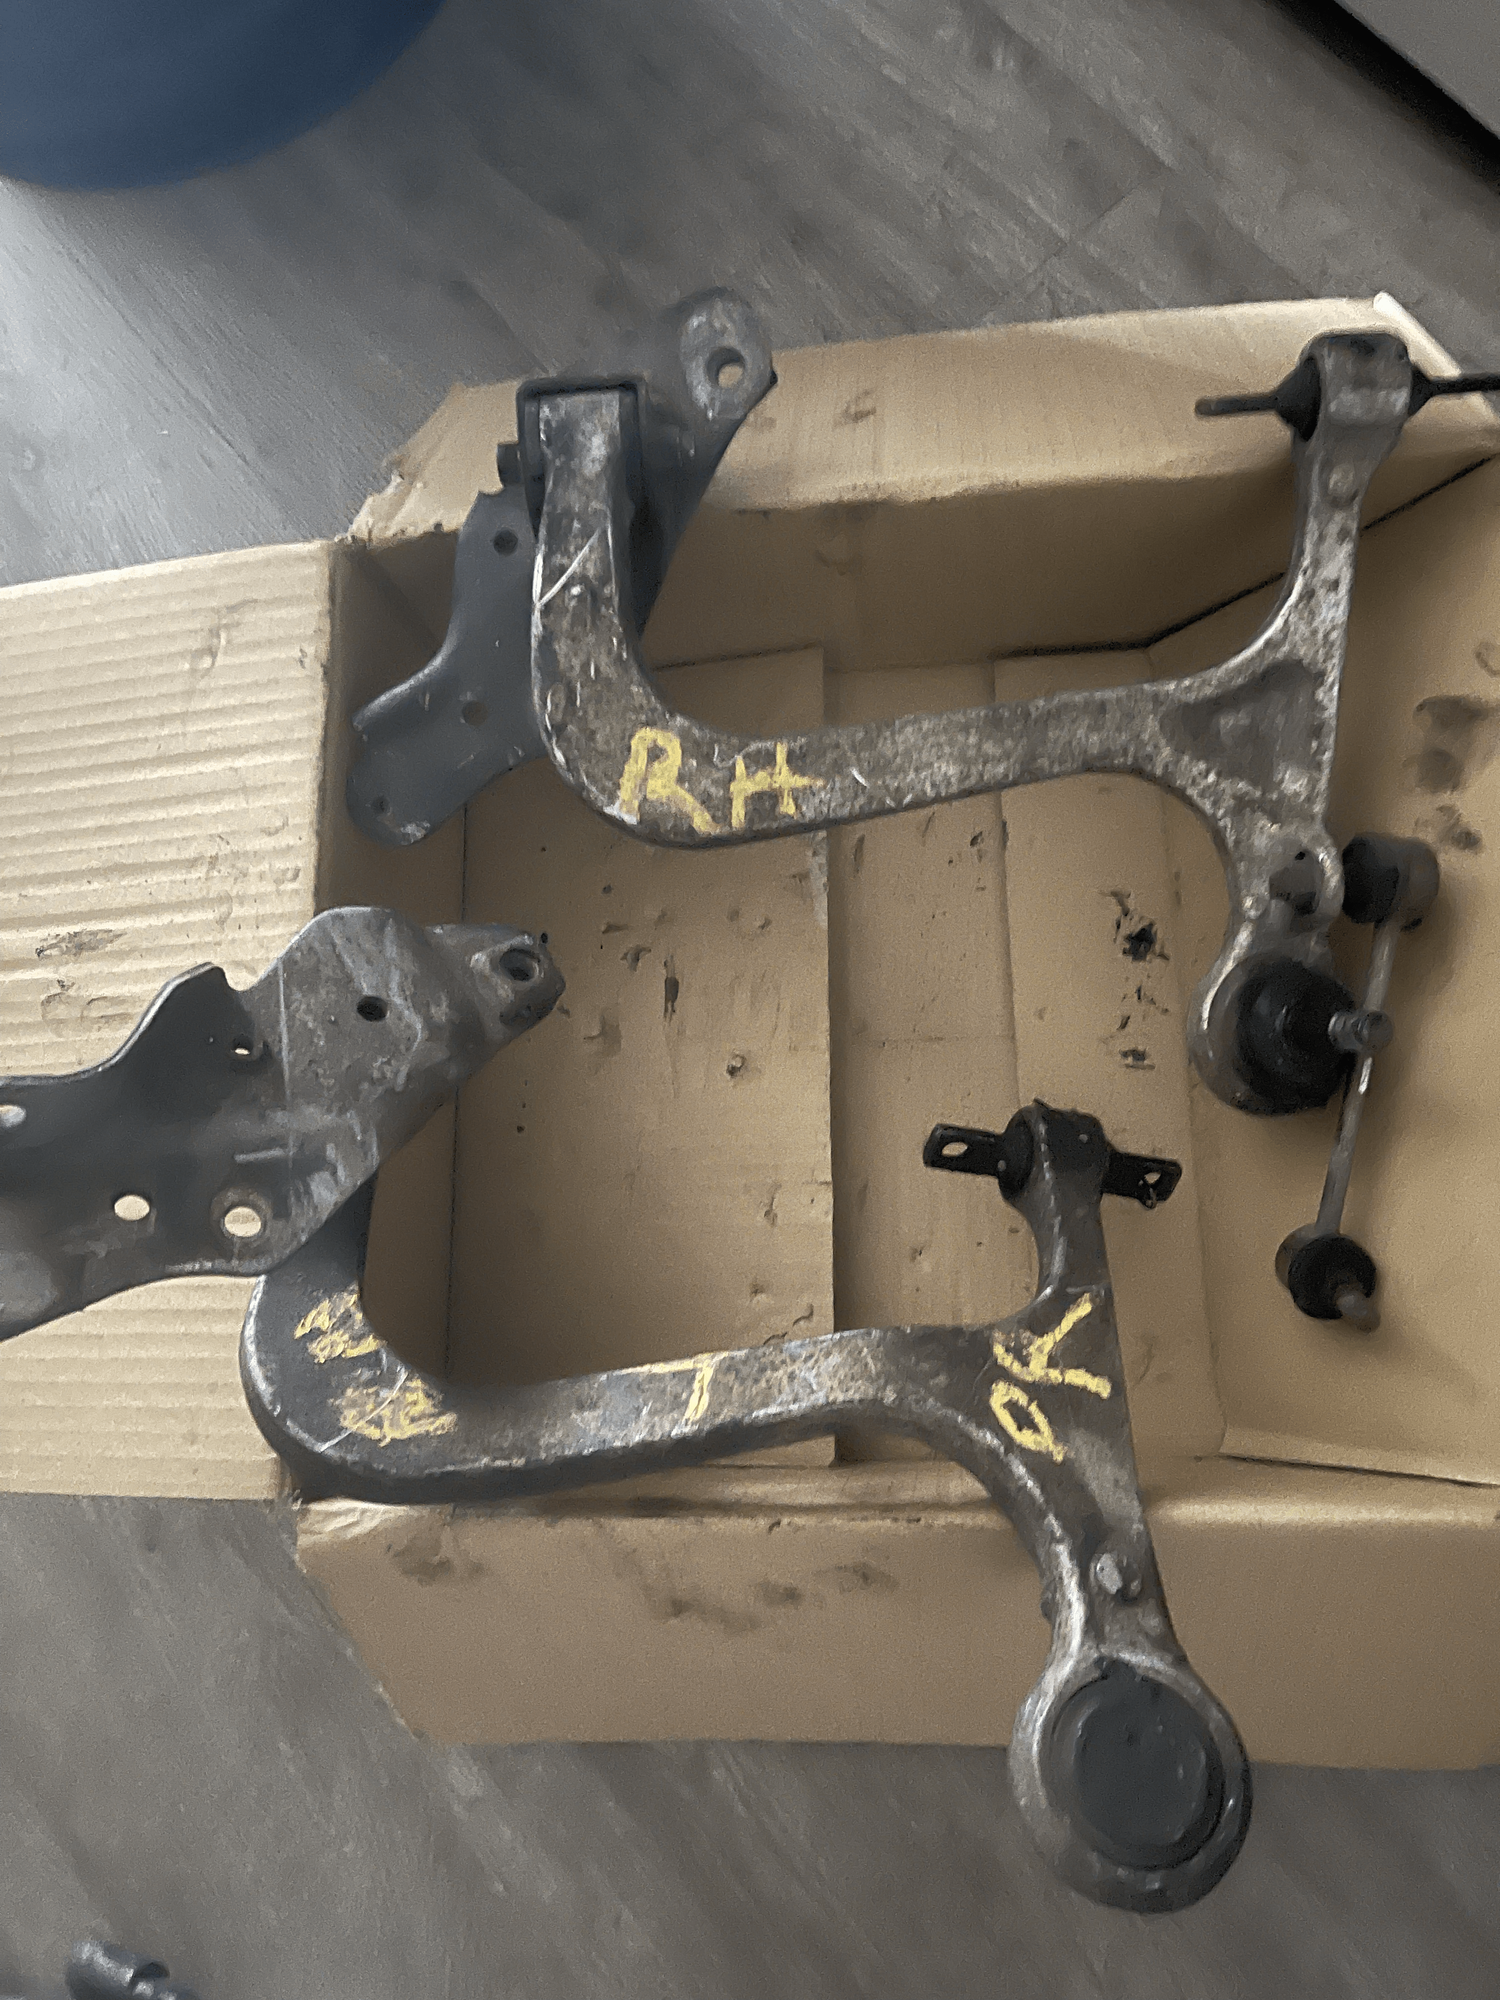 Miscellaneous - Evo VII OEM Parts - ECU, AC Comp, Suspension Arms, Steering Rack,... - Used - All Years  All Models - Charlotte, NC 28204, United States